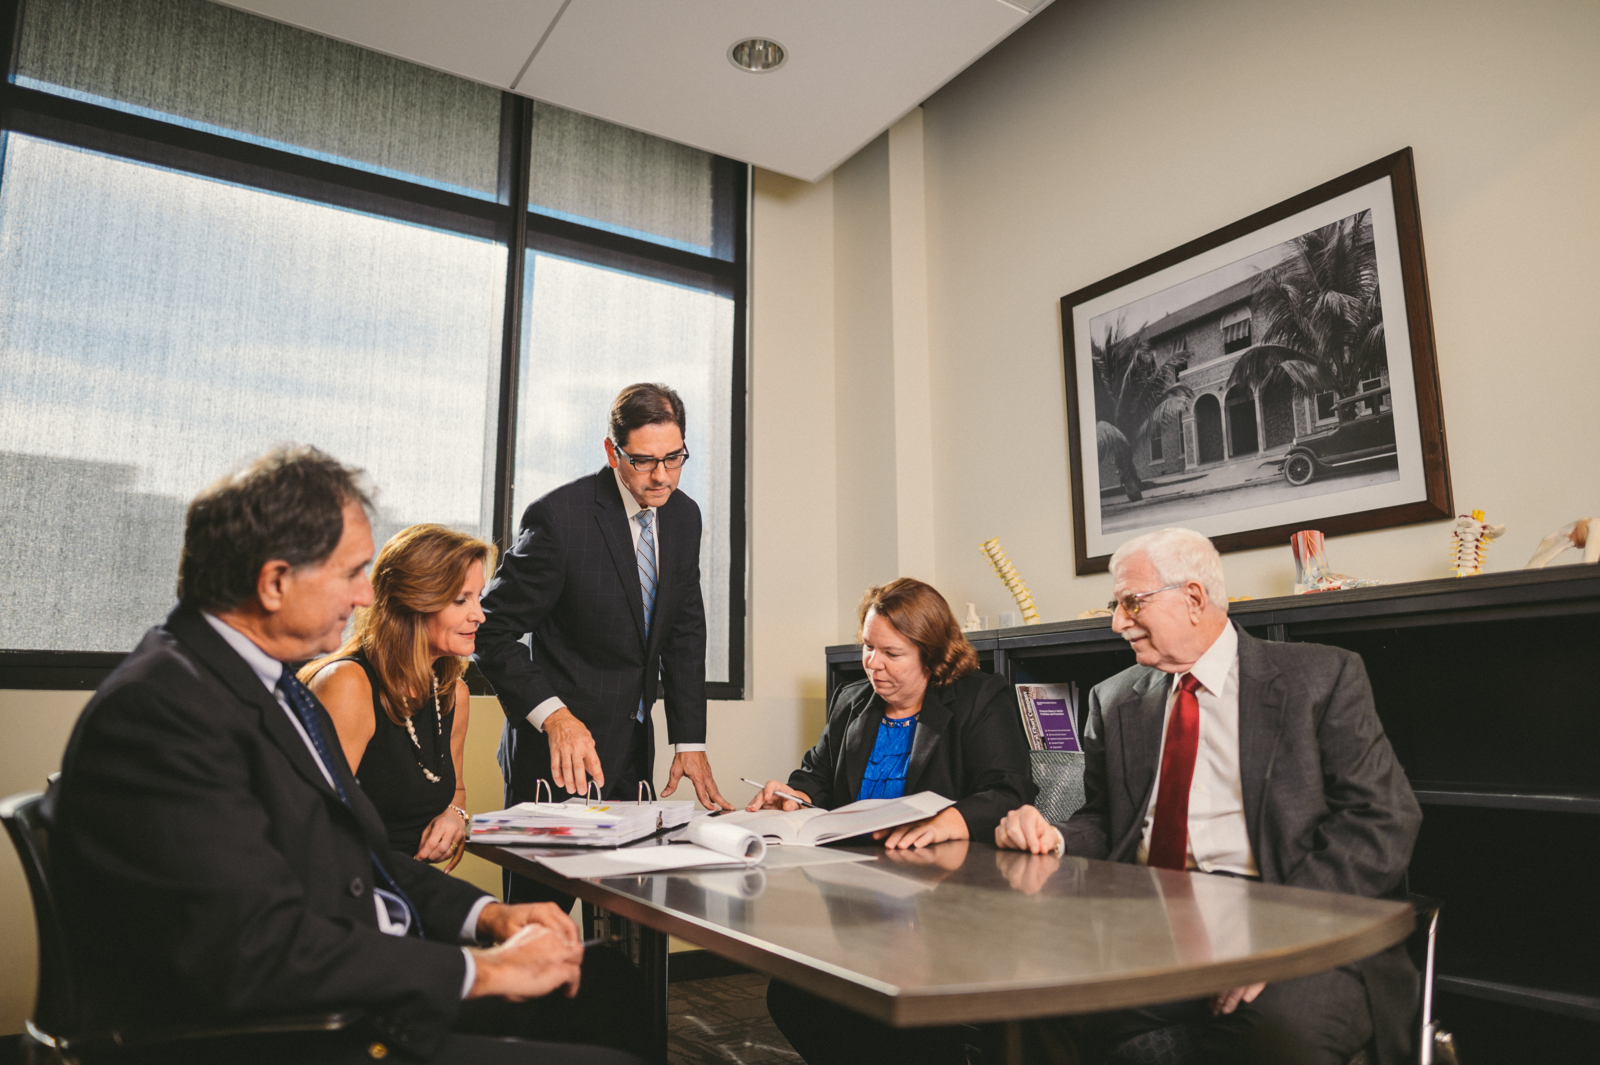 Three male and two female lawyers discussing a case in a conference room